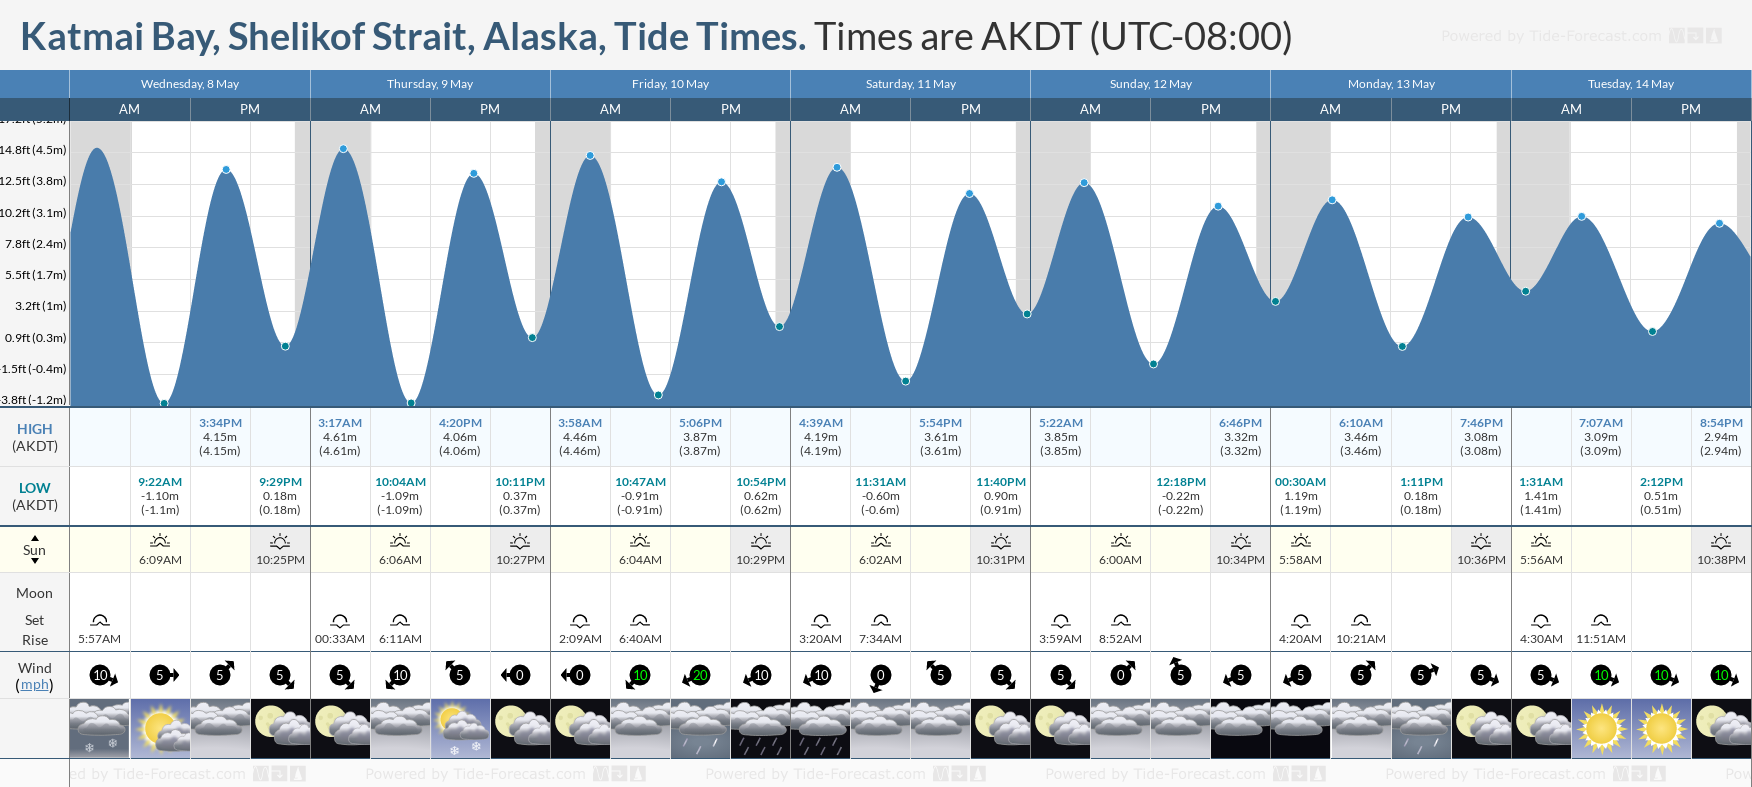 Katmai Bay, Shelikof Strait, Alaska Tide Chart including high and low tide tide times for the next 7 days